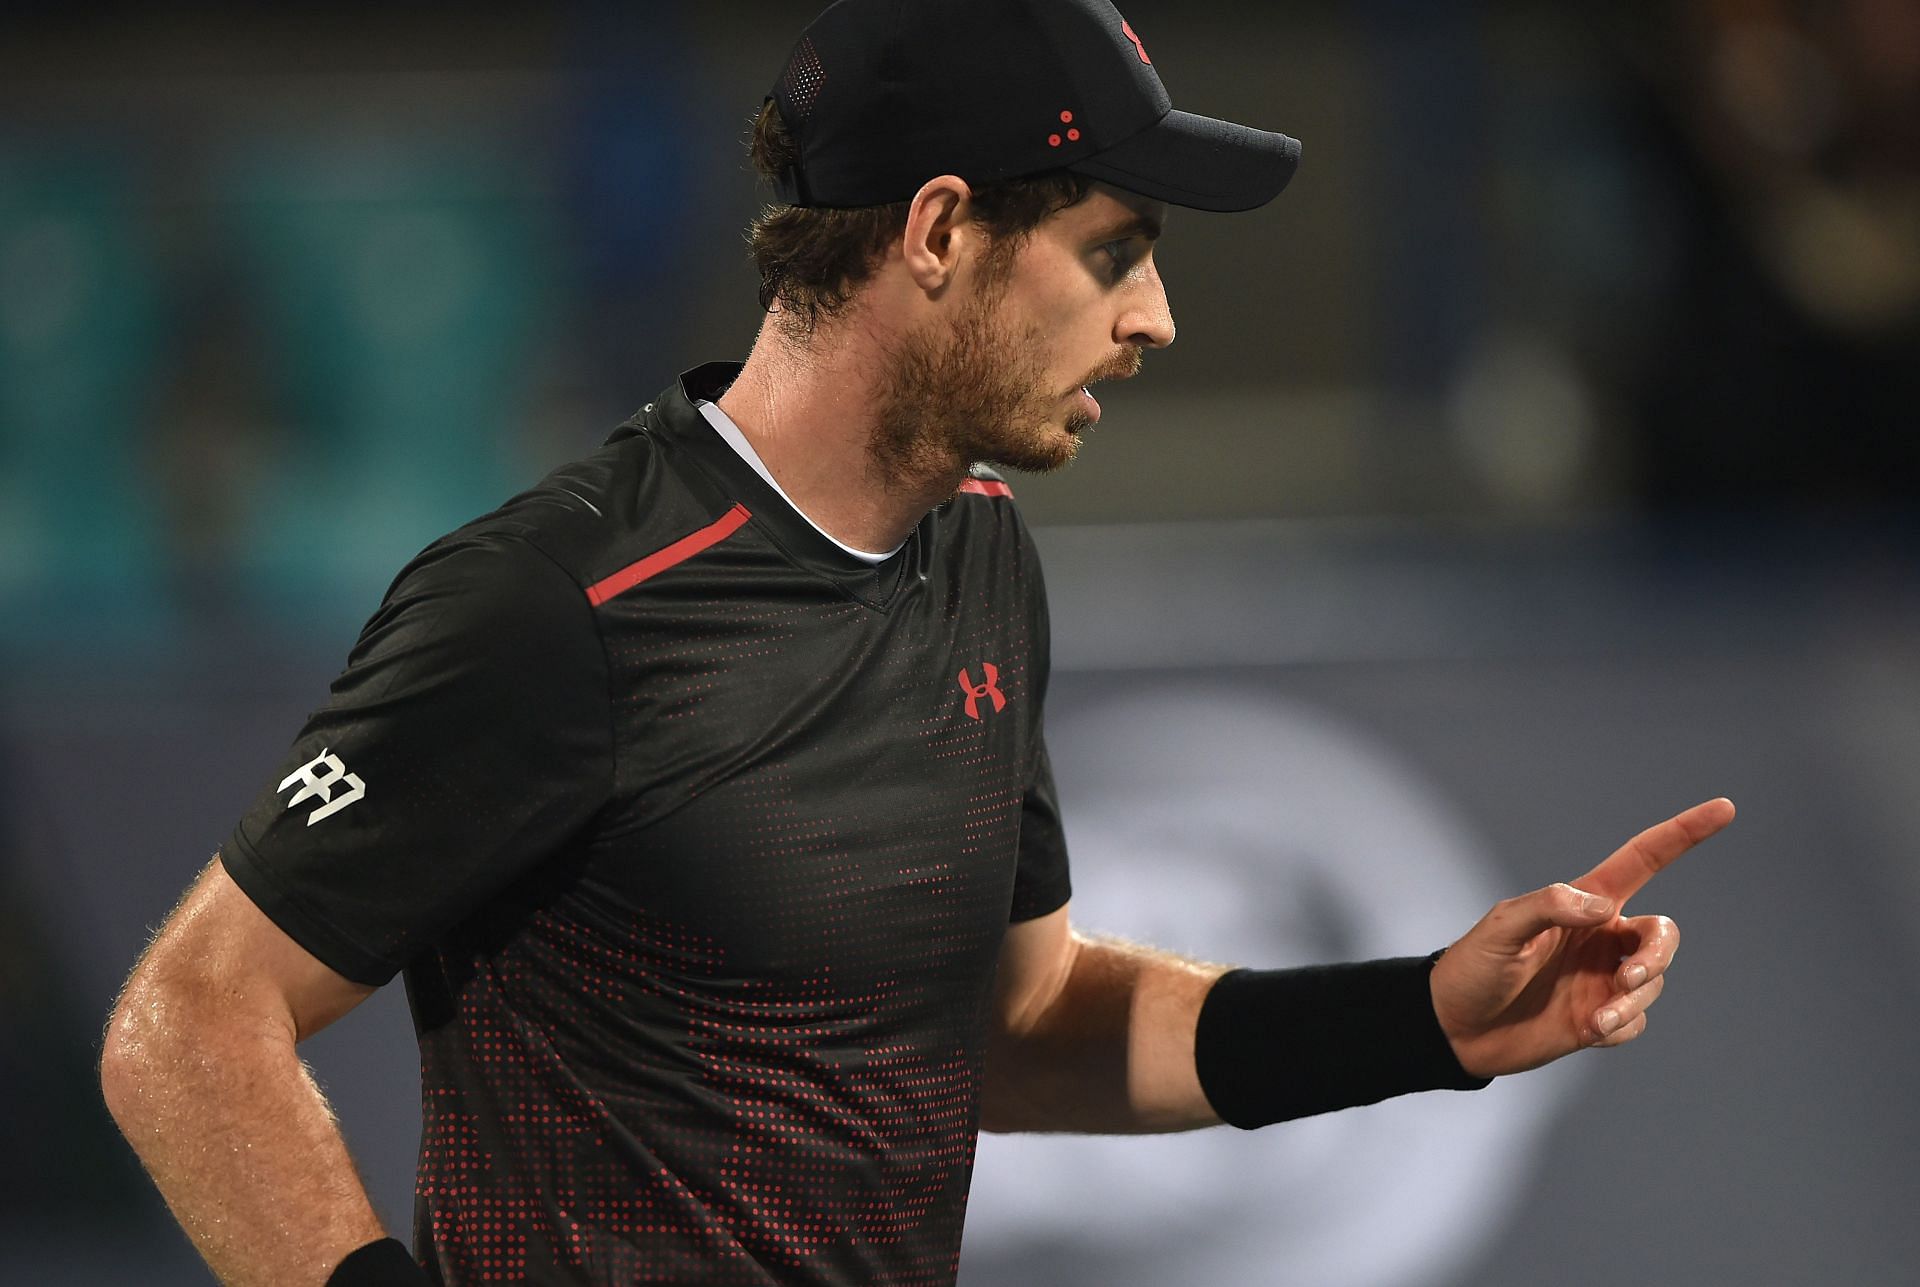 Andy Murray finished as the runner-up at the 2021 Mubadala World Tennis Championship